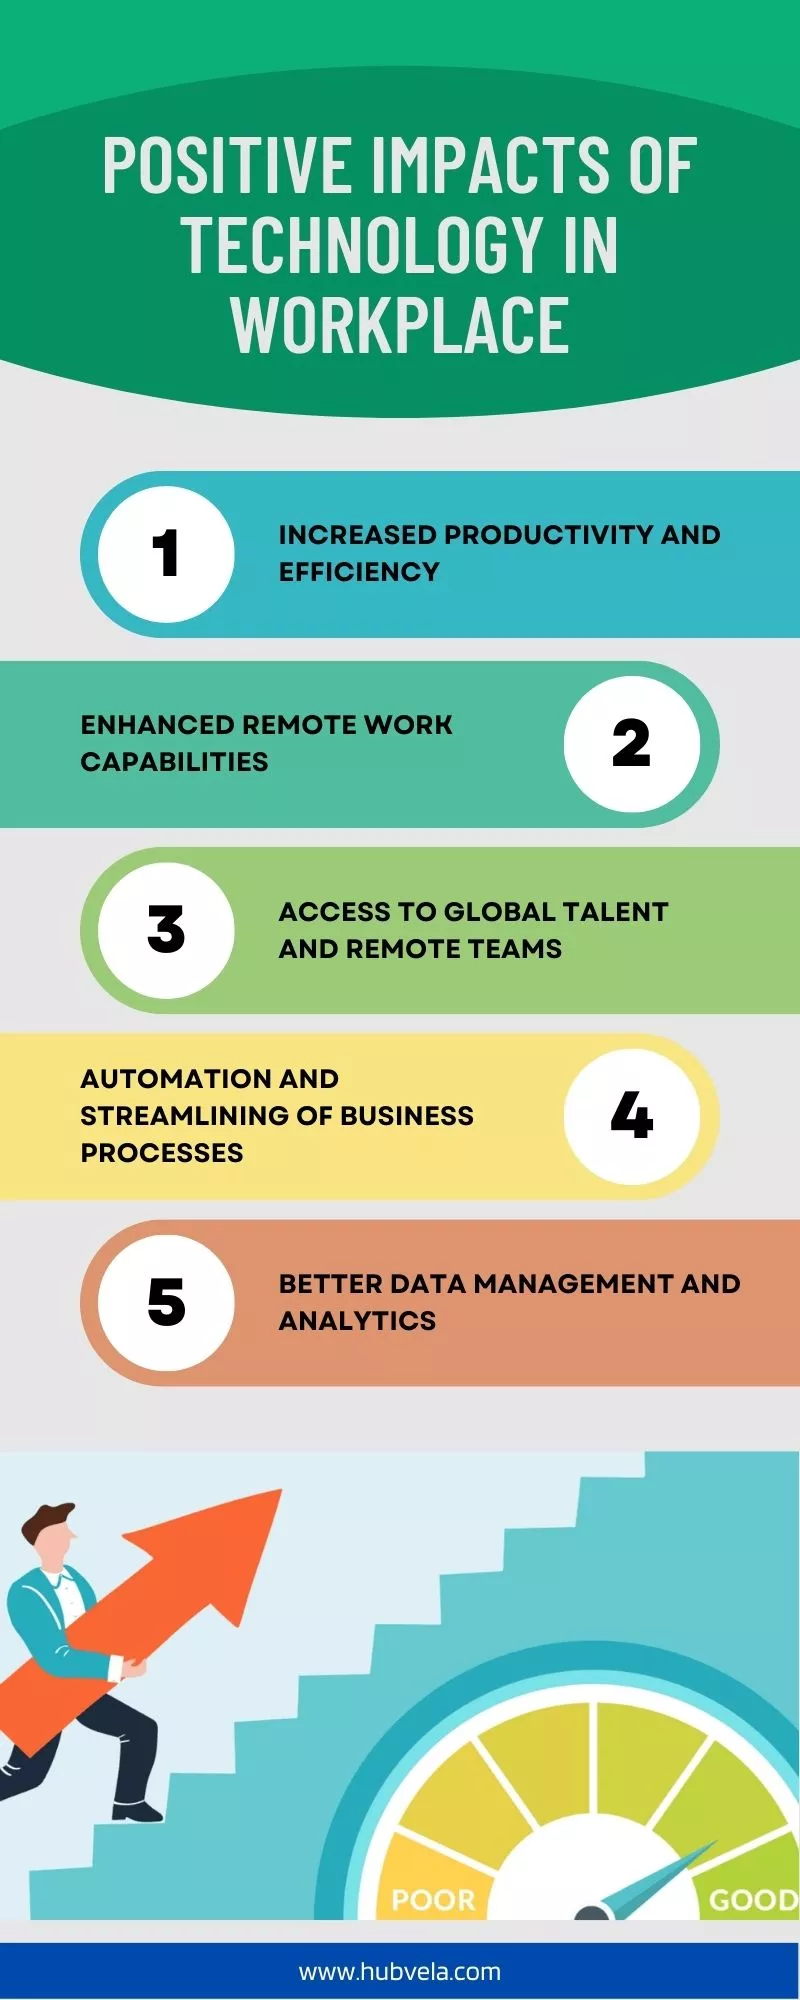 Positive Impacts of Technology on Workplace infographic